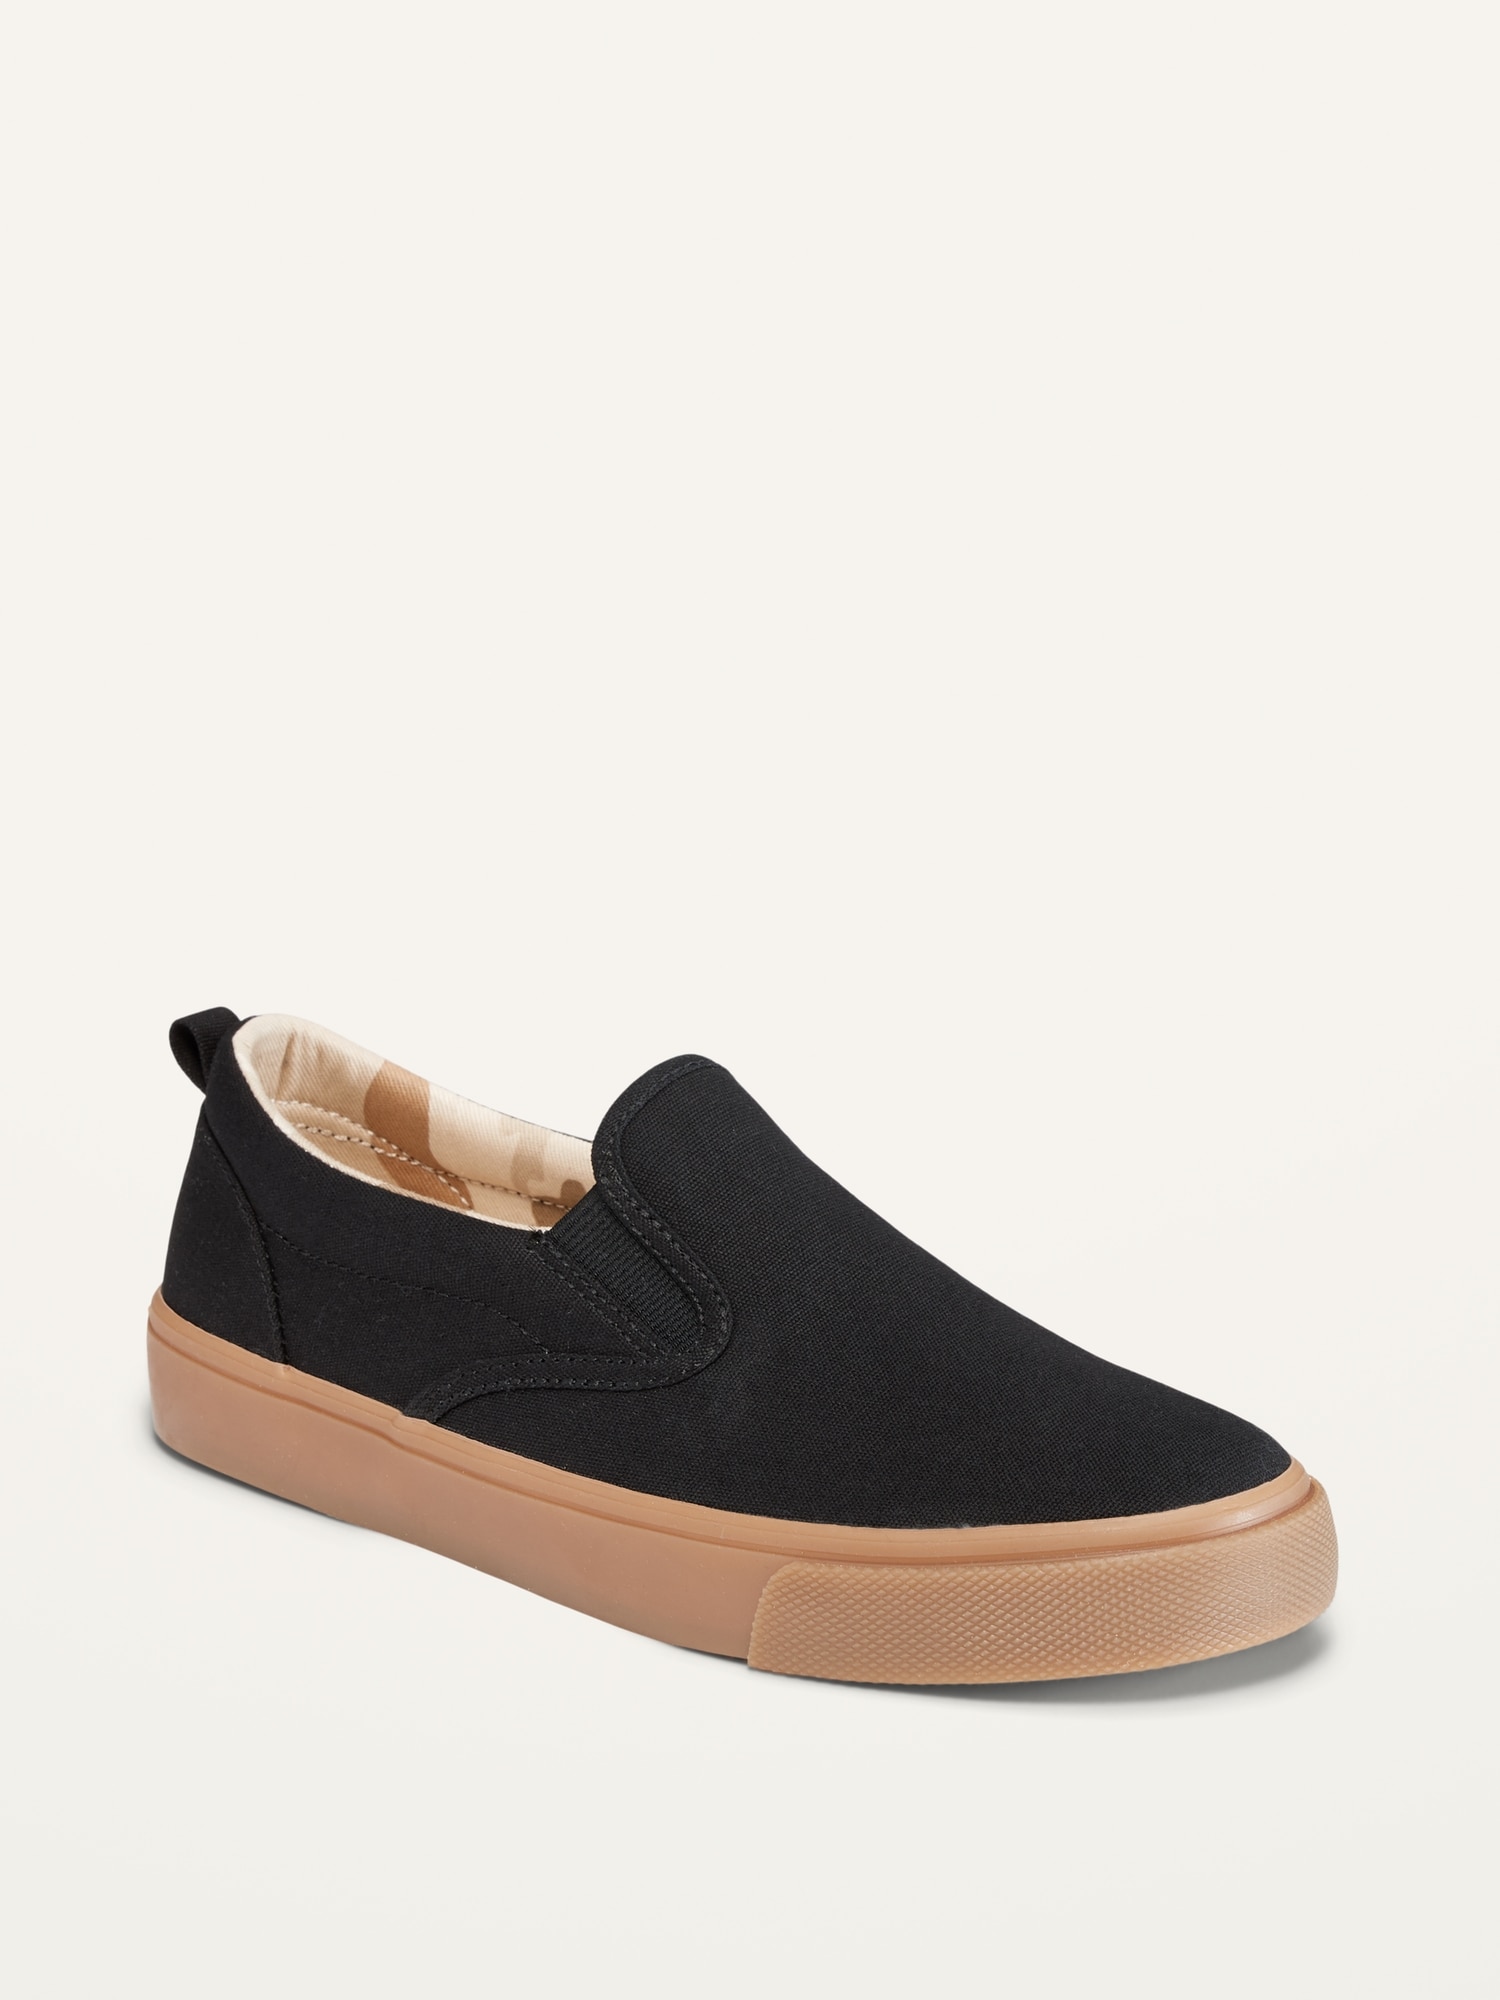 Old Navy Canvas Slip-On Sneakers for Boys black. 1